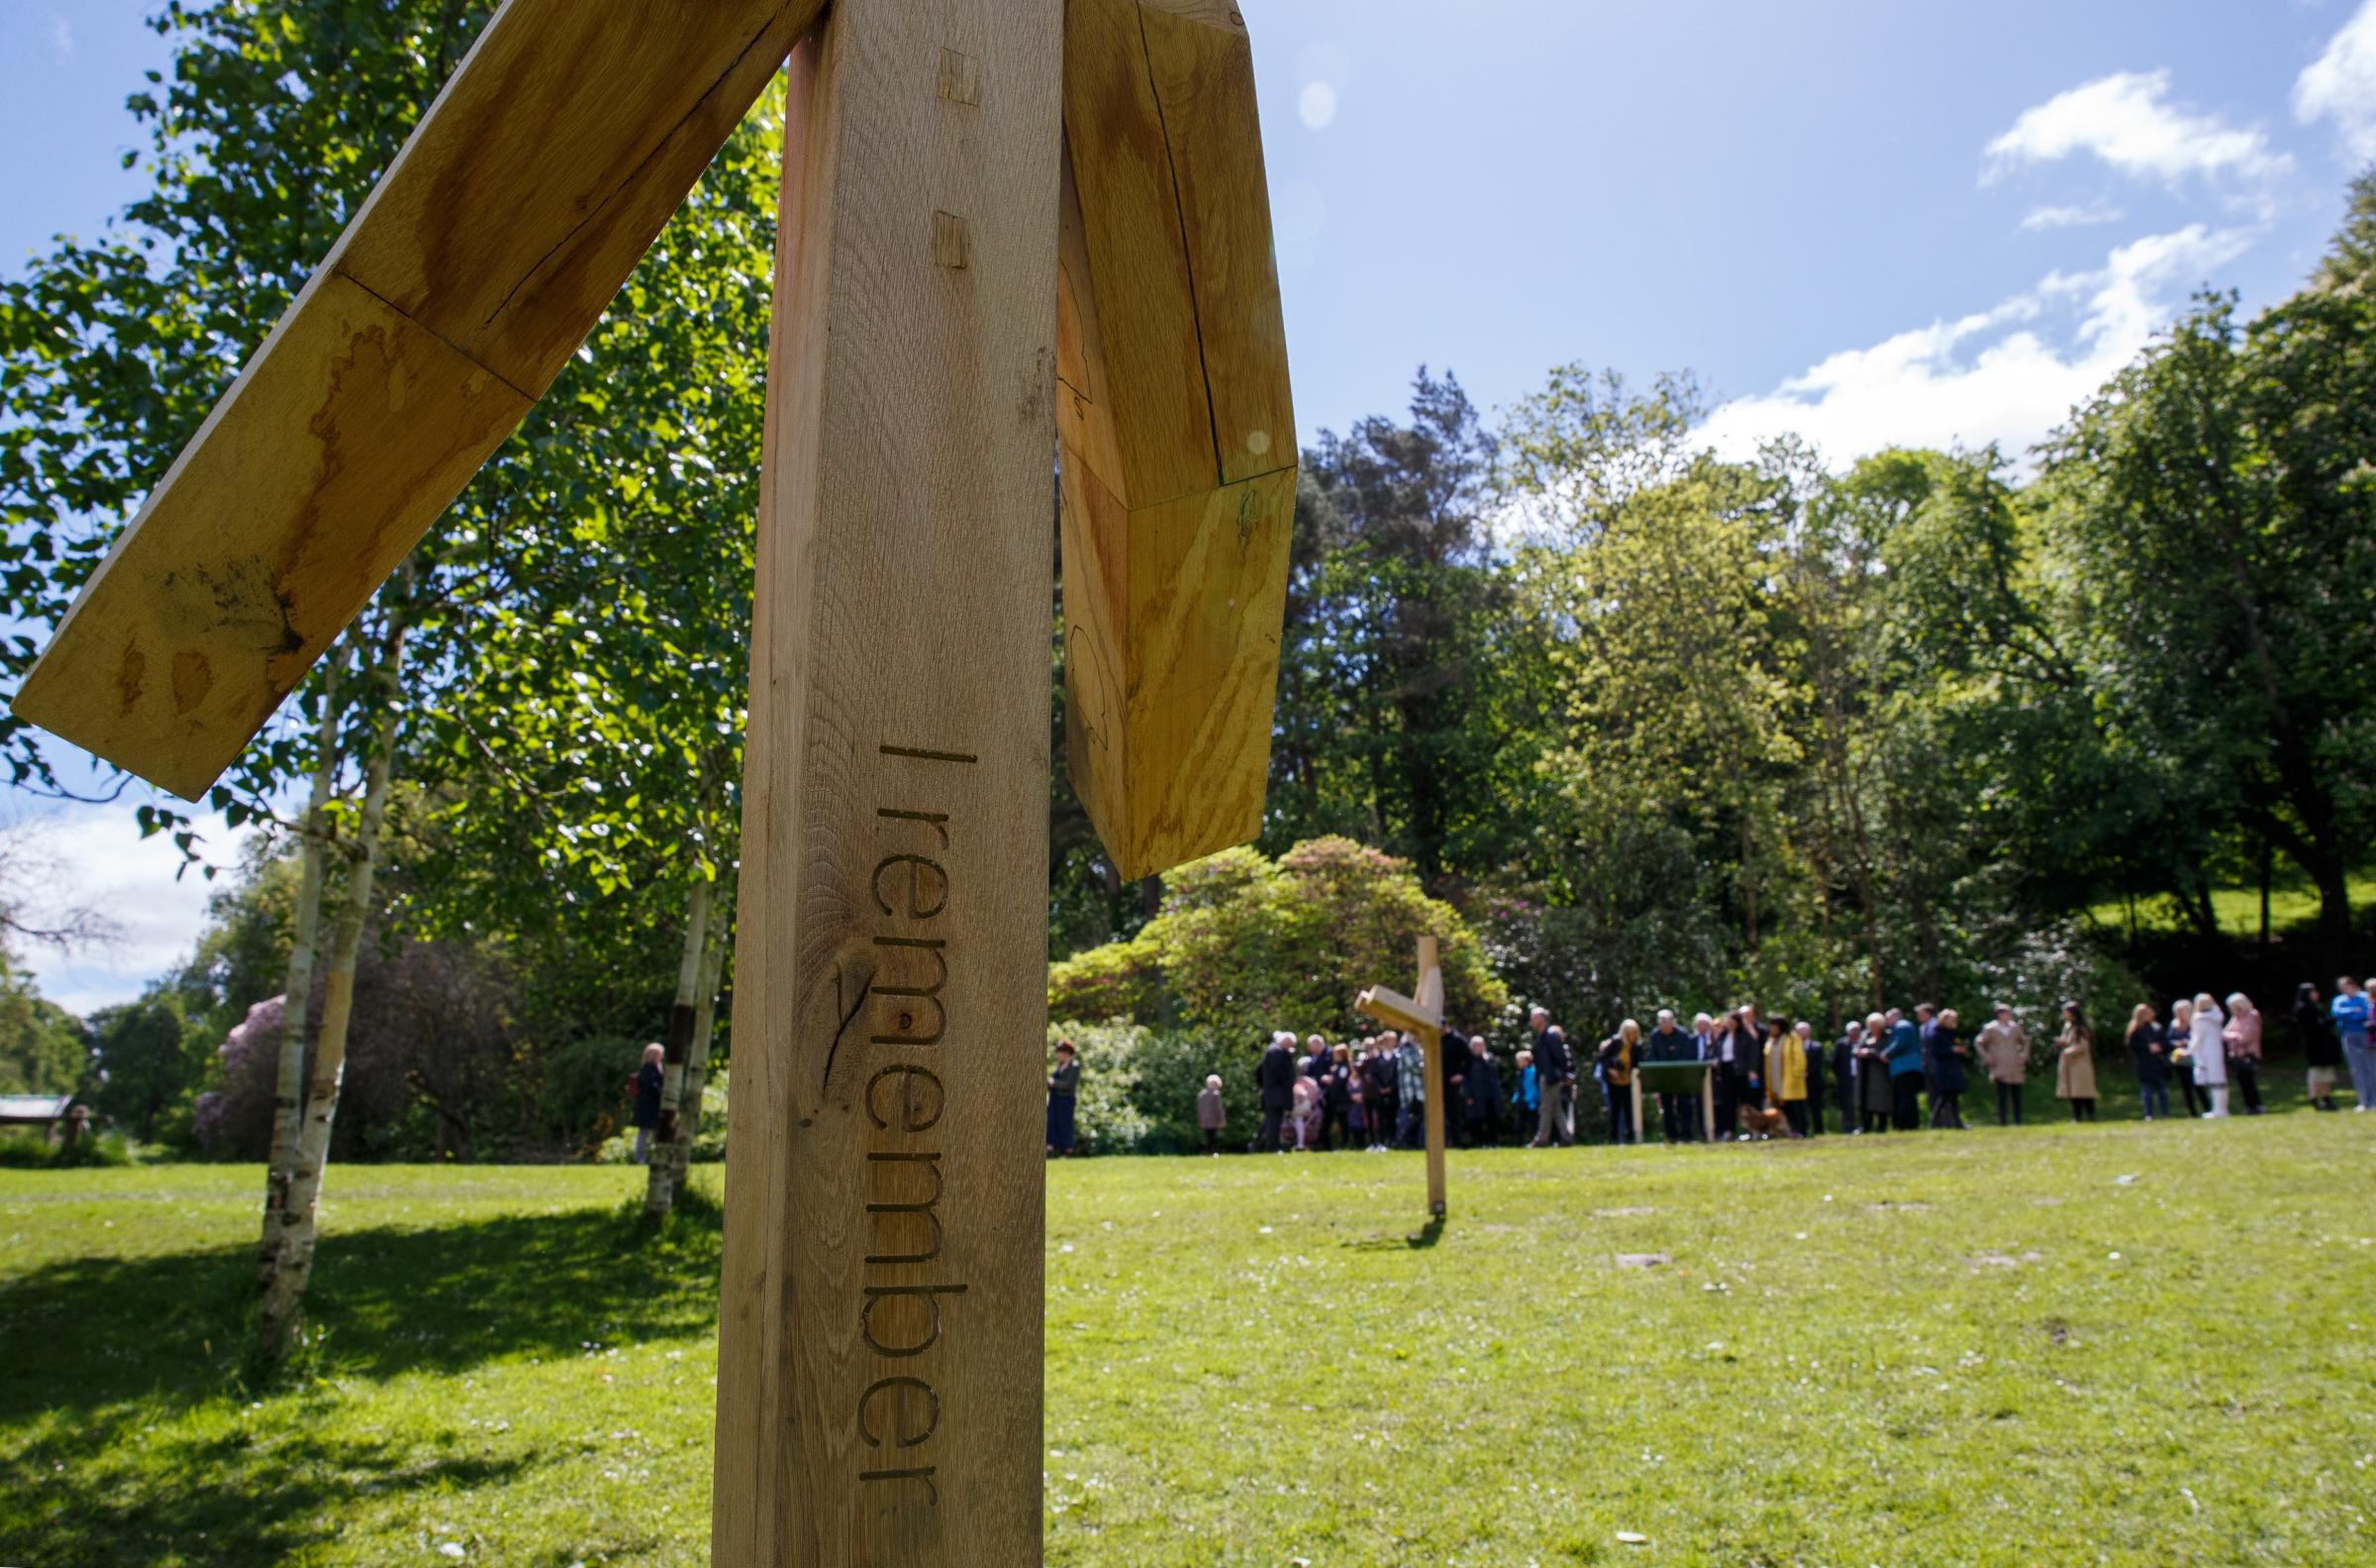 People pictured at Birch grove in Pollok Country Park. Birch Grove is one of the areas in the park where artist Alec Finlay has installed supports as part of the I Remember memorial. Photograph by Colin Mearns.